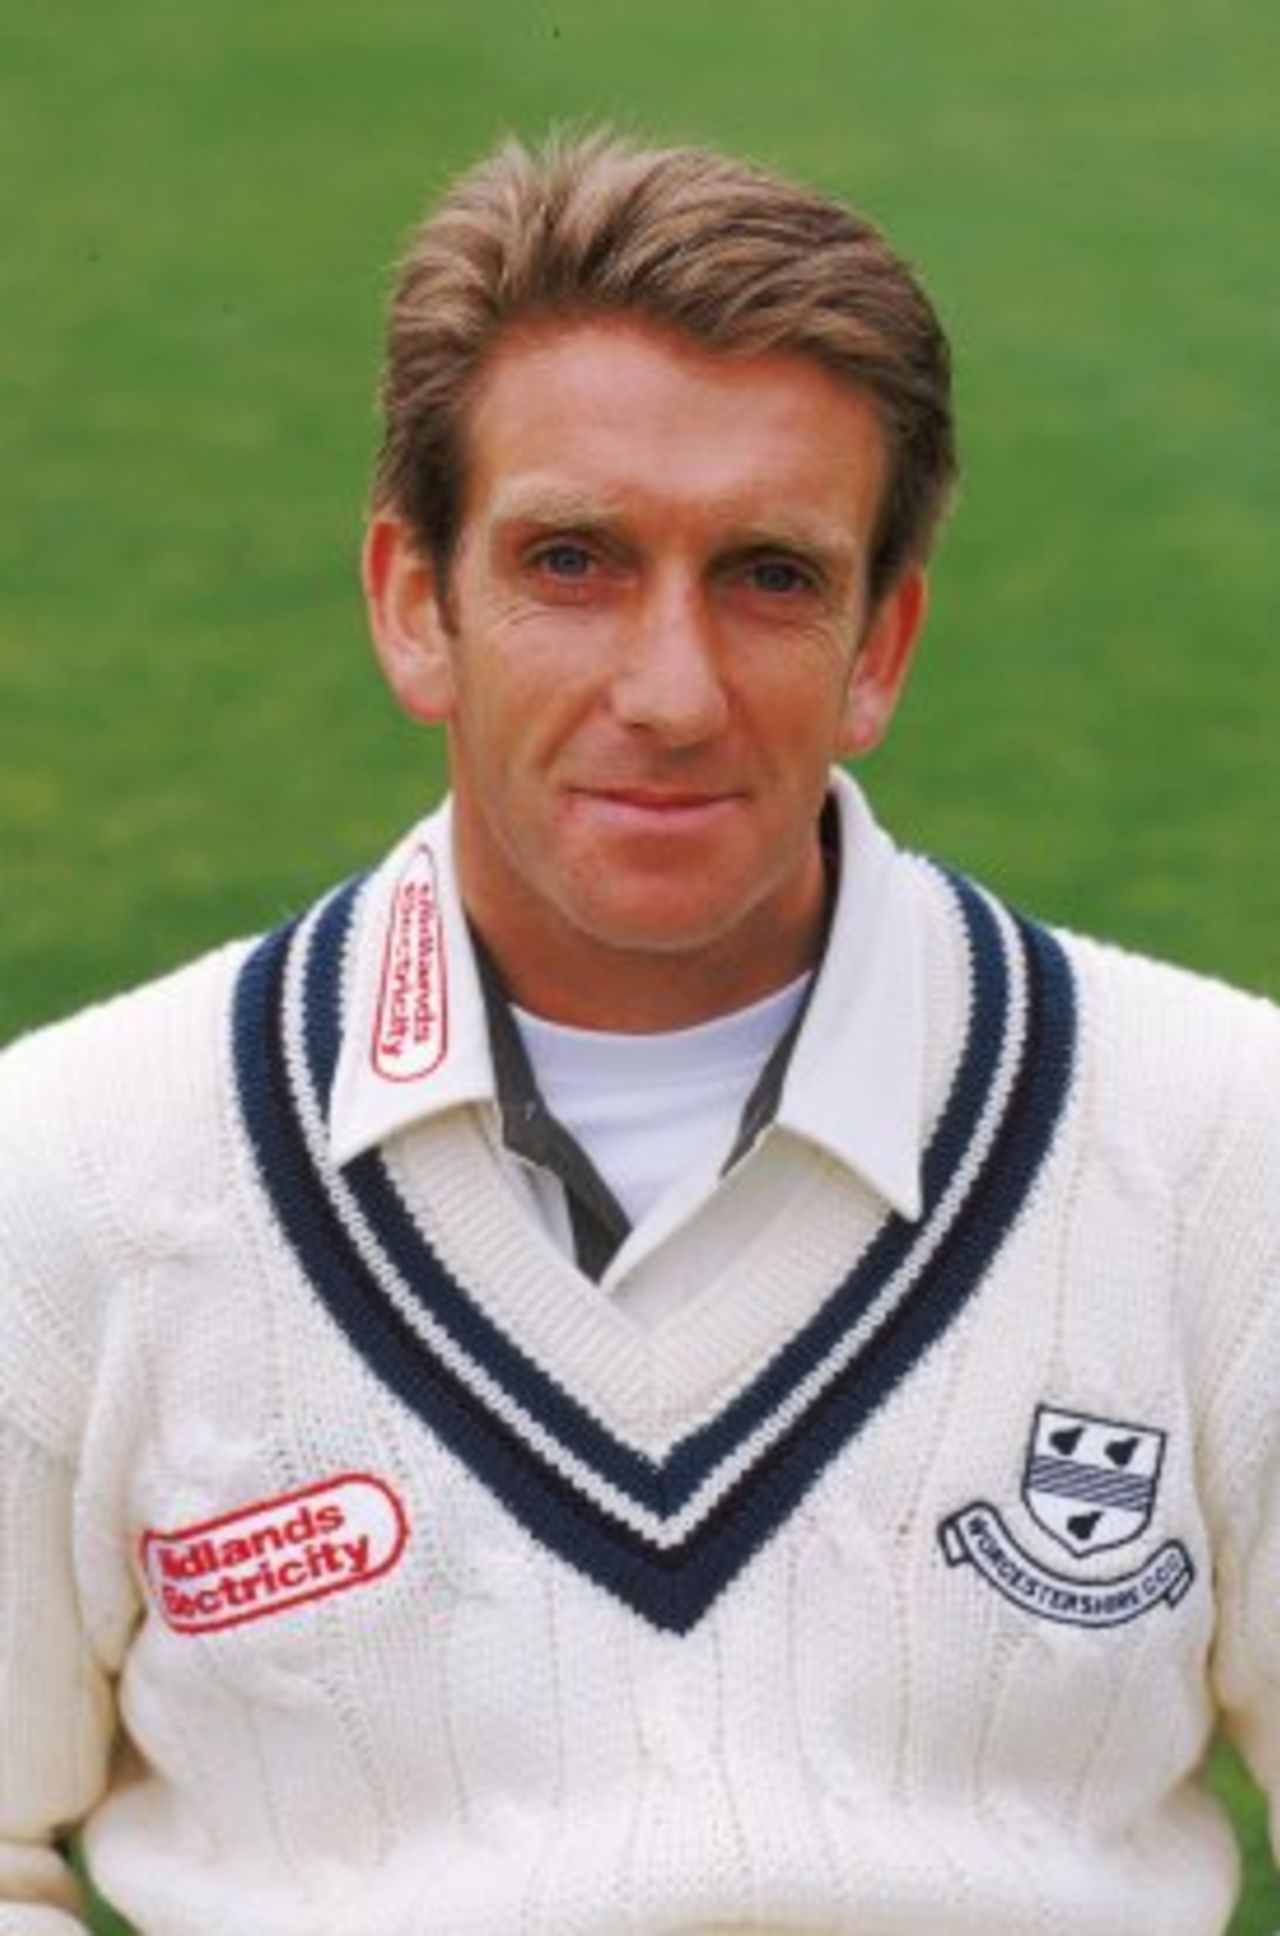 14 Apr 2000: Portrait of Paul Pollard taken during a Worcestershire County Cricket Club photocall at New Road in Worcester, England.